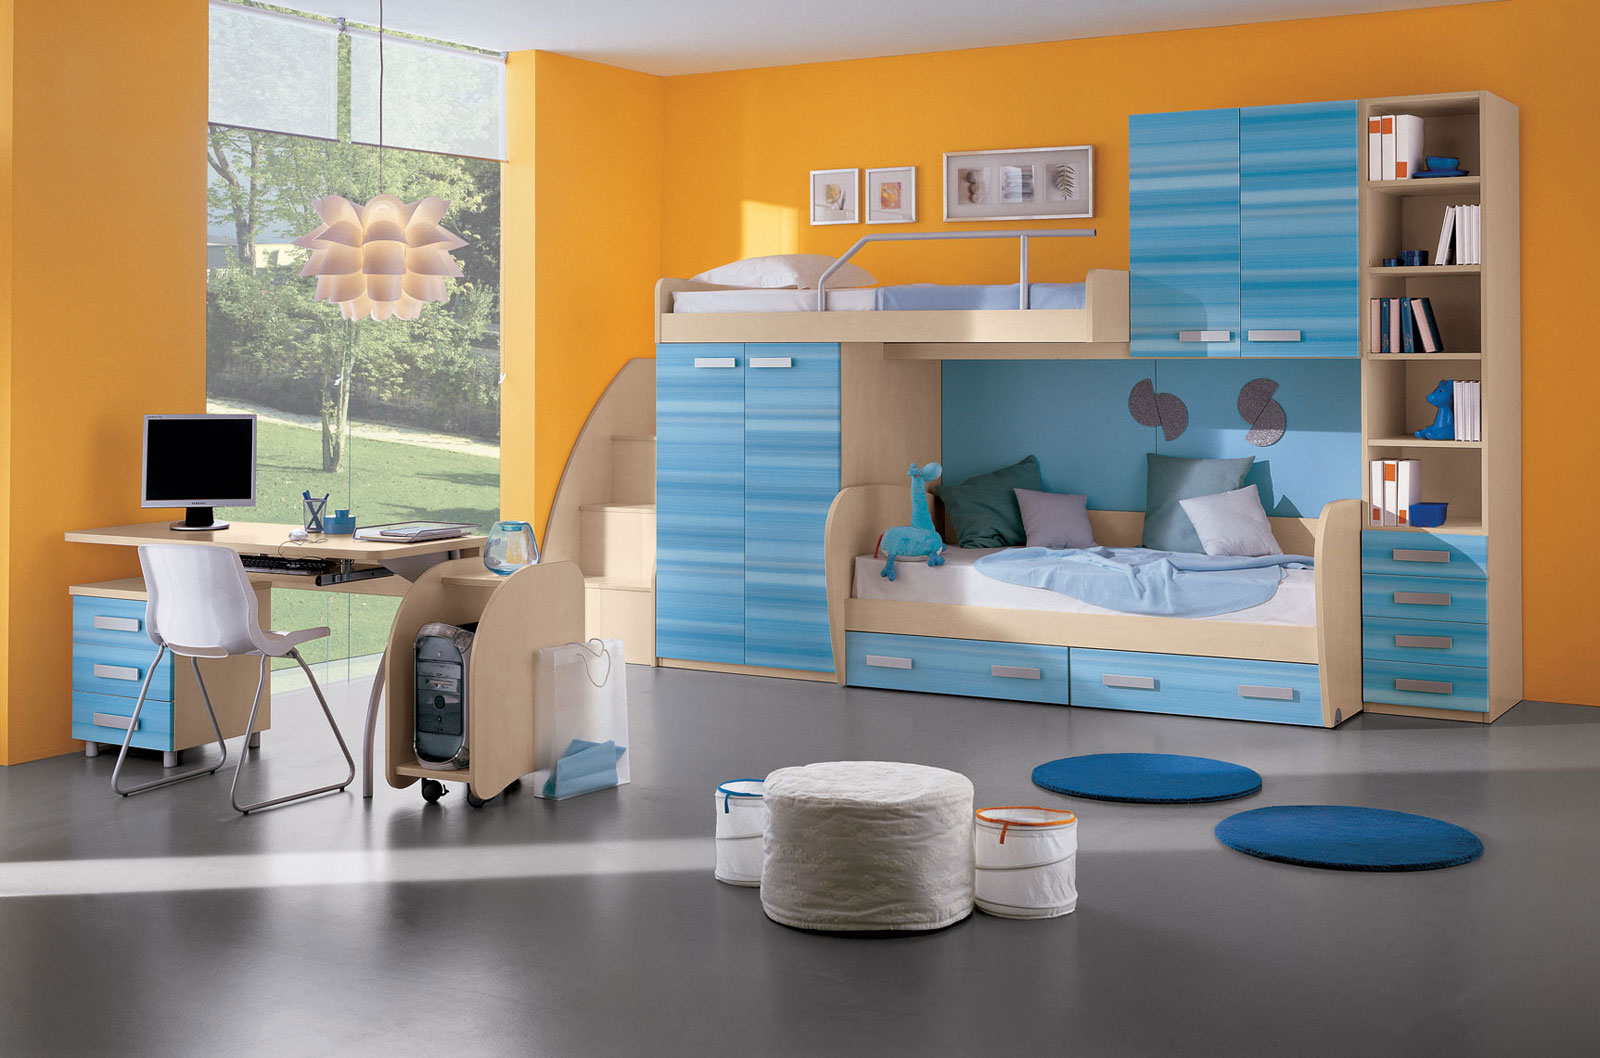 Yellow Accent Matched Remarkable Yellow Accent Wall Color Matched With Blue Furniture Of Boys Bedroom Ideas Completed With Twin Bunk Bed Combined By Drawers Cabinets And Furnished With Desk Plus White Chair Bedroom Boys Bedroom Ideas: The Important Aspects